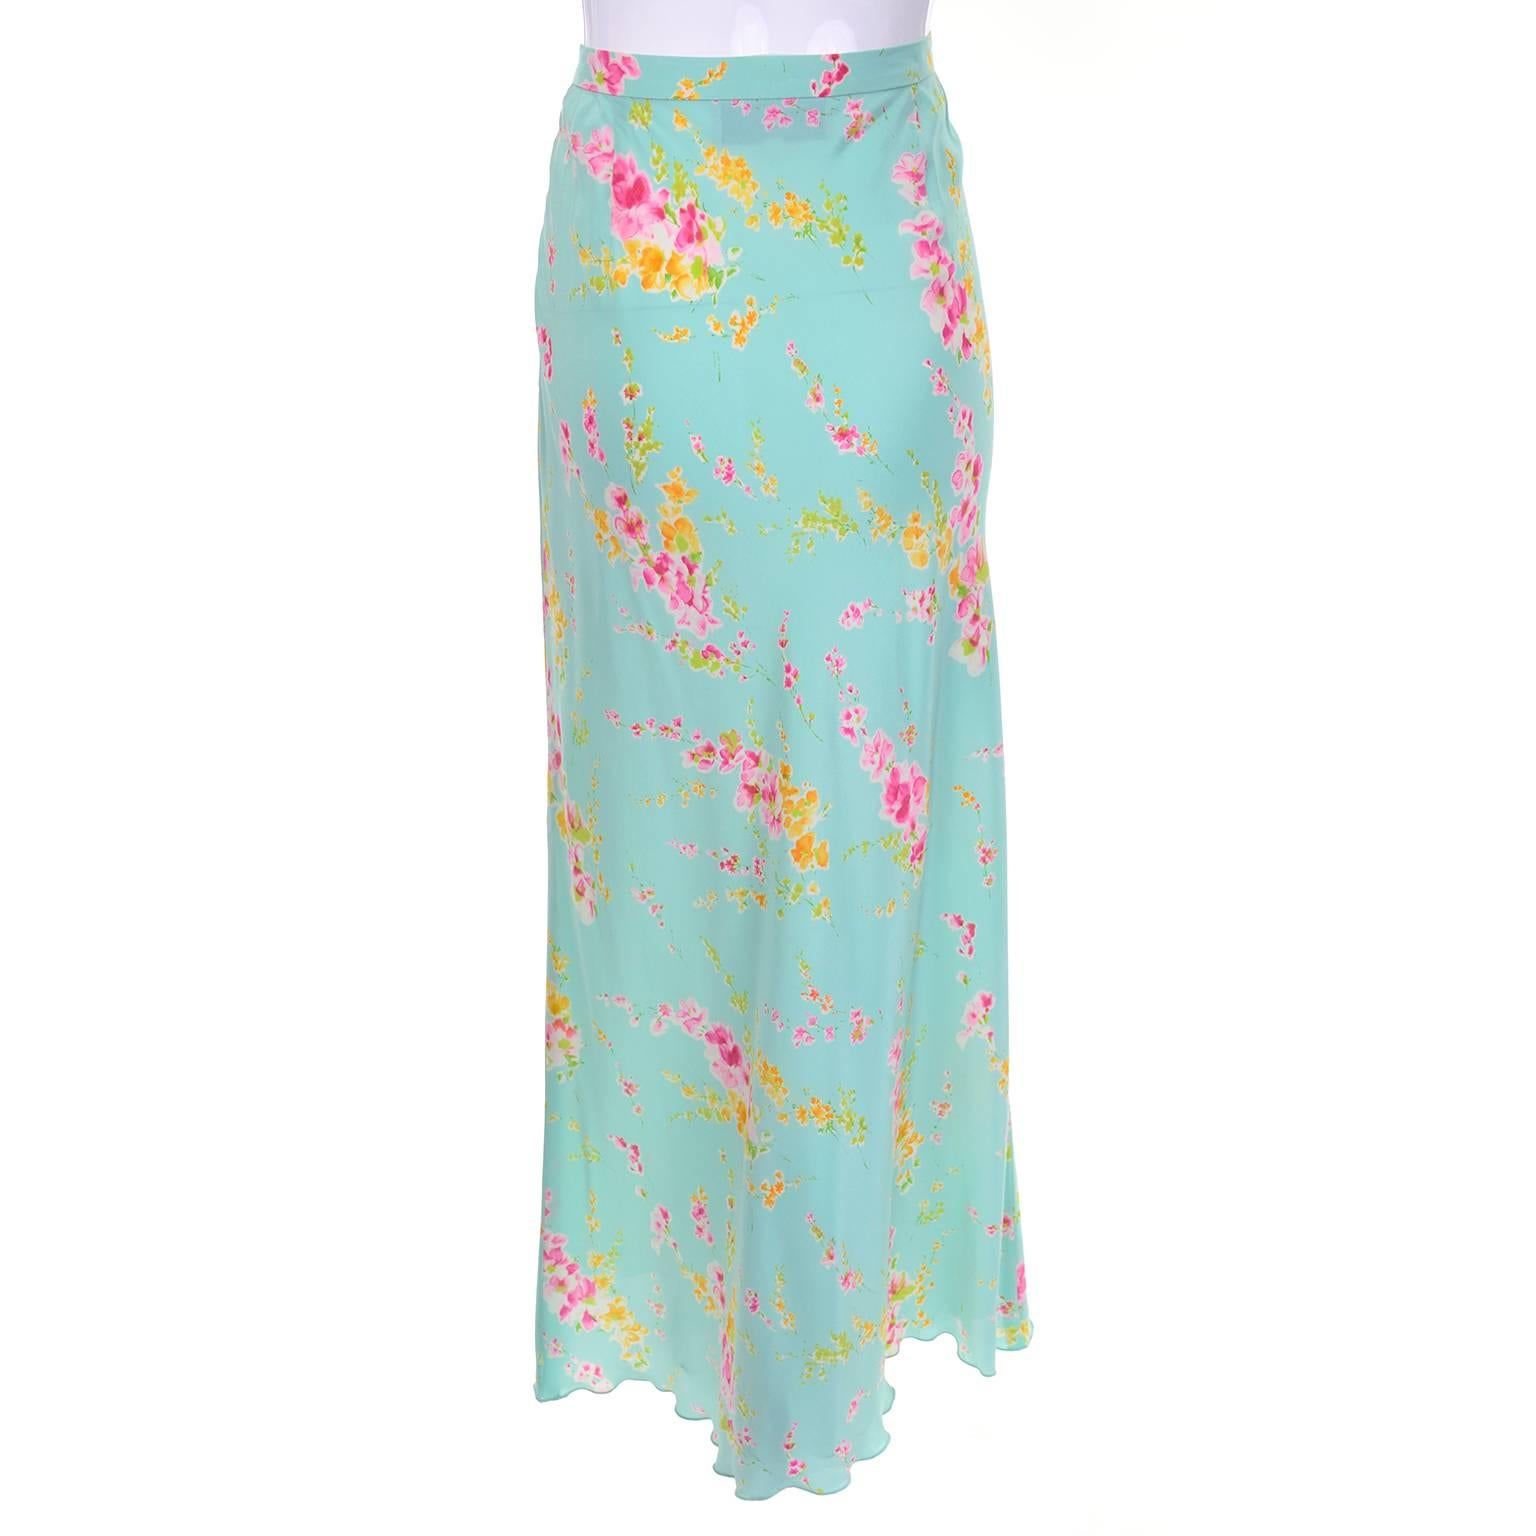 This Emanuel Ungaro parallele pretty blue pastel silk vintage skirt has beautiful pink and yellow flowers and it is perfect to wear all Spring or Summer. The skirt is lined with a fine layer of organza and closes with a side zipper. Ungaro made such